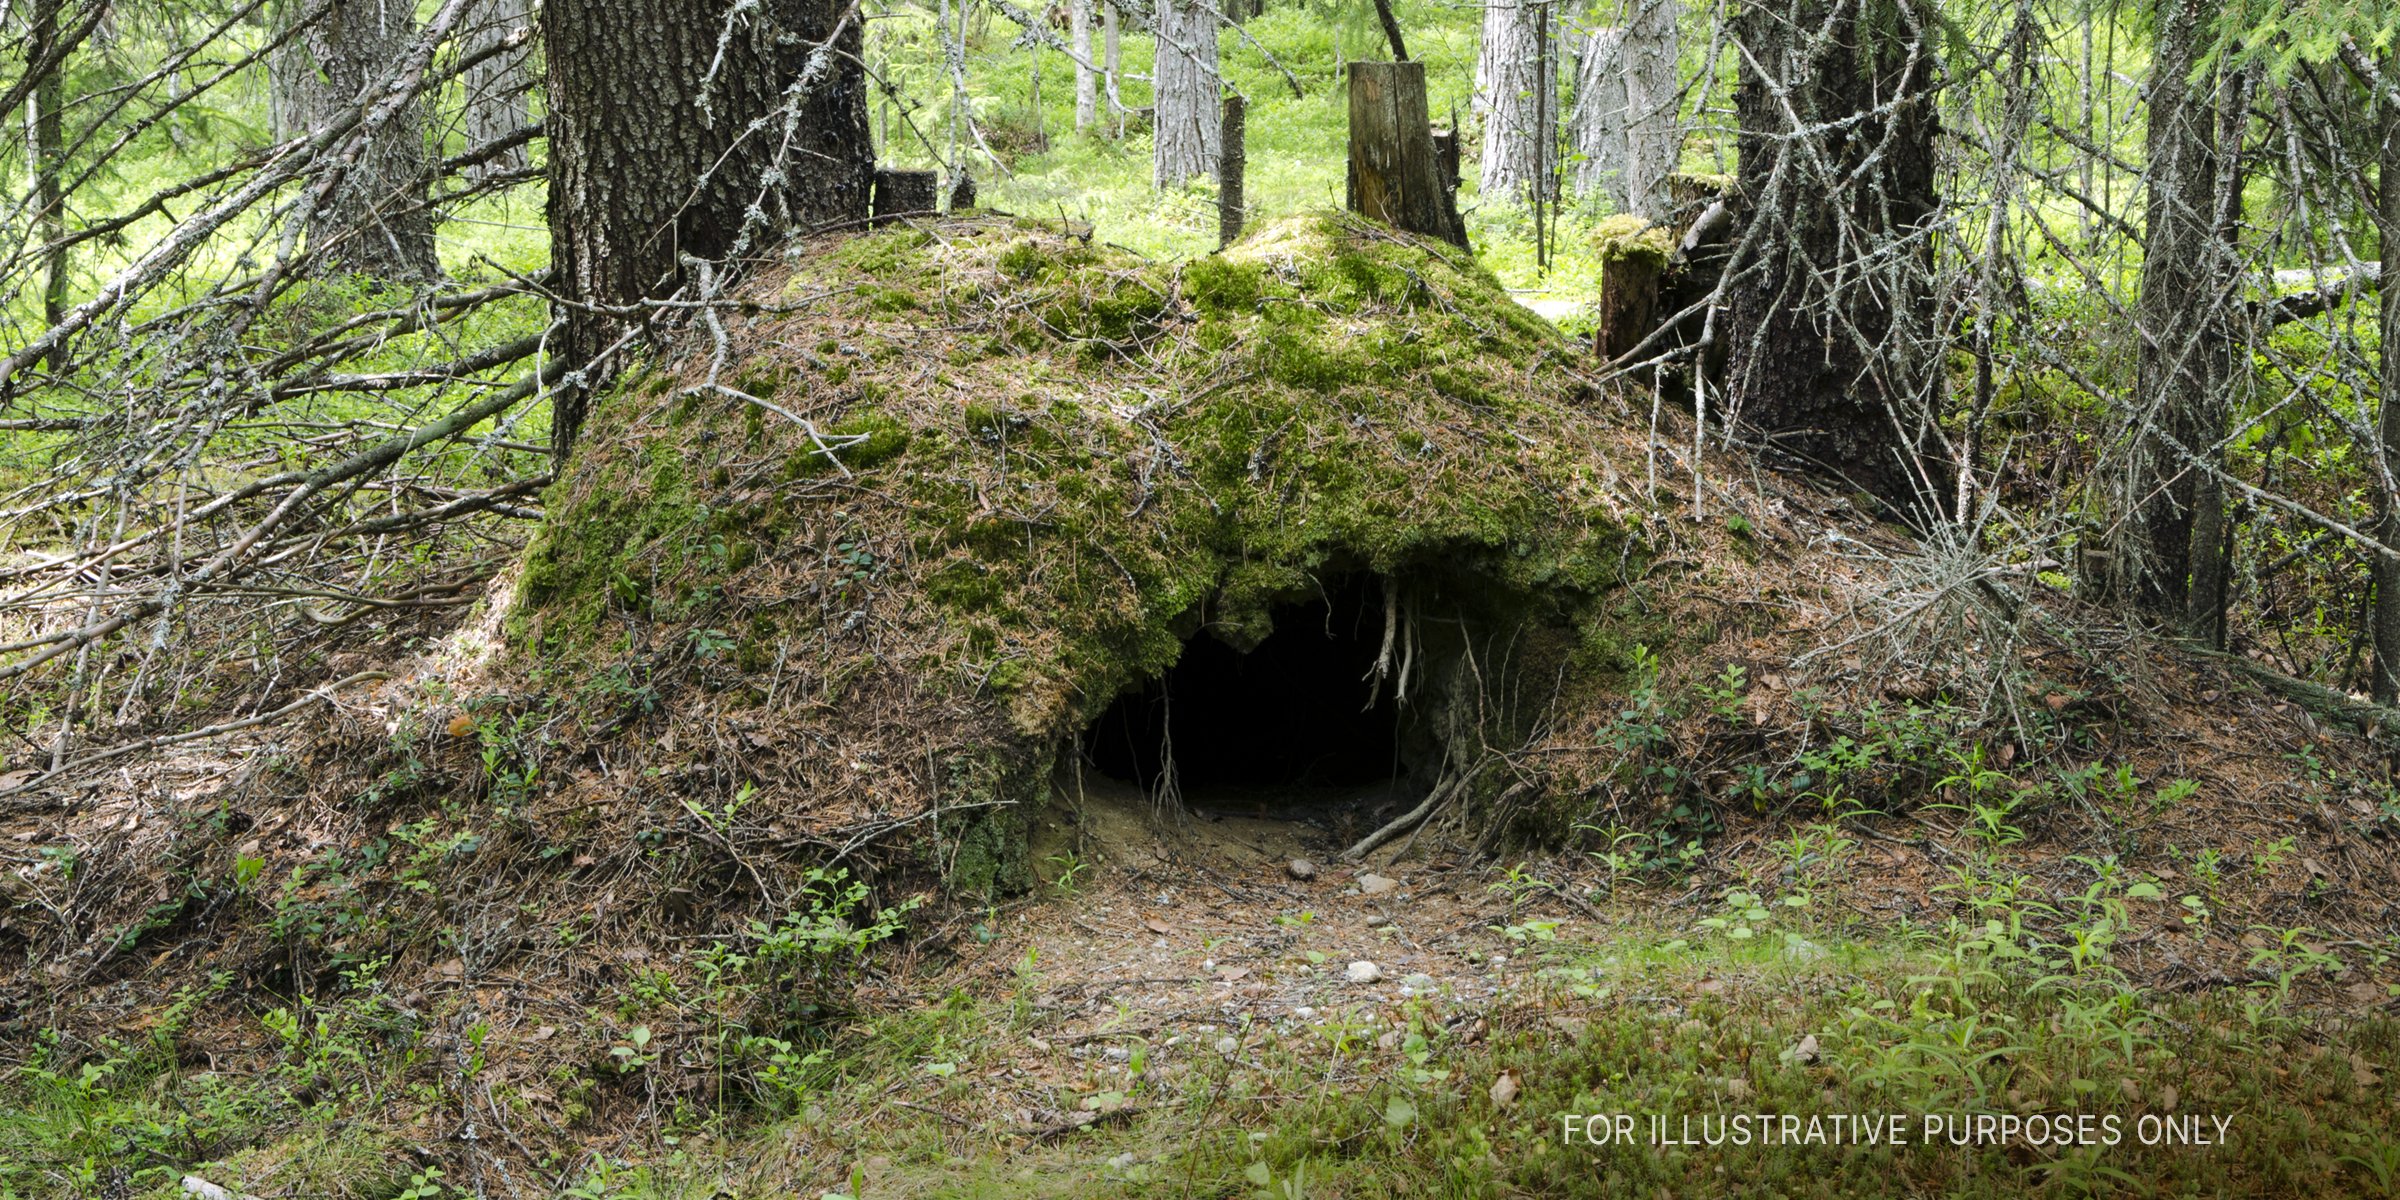 A cave surrounded by trees | Source: Shutterstock